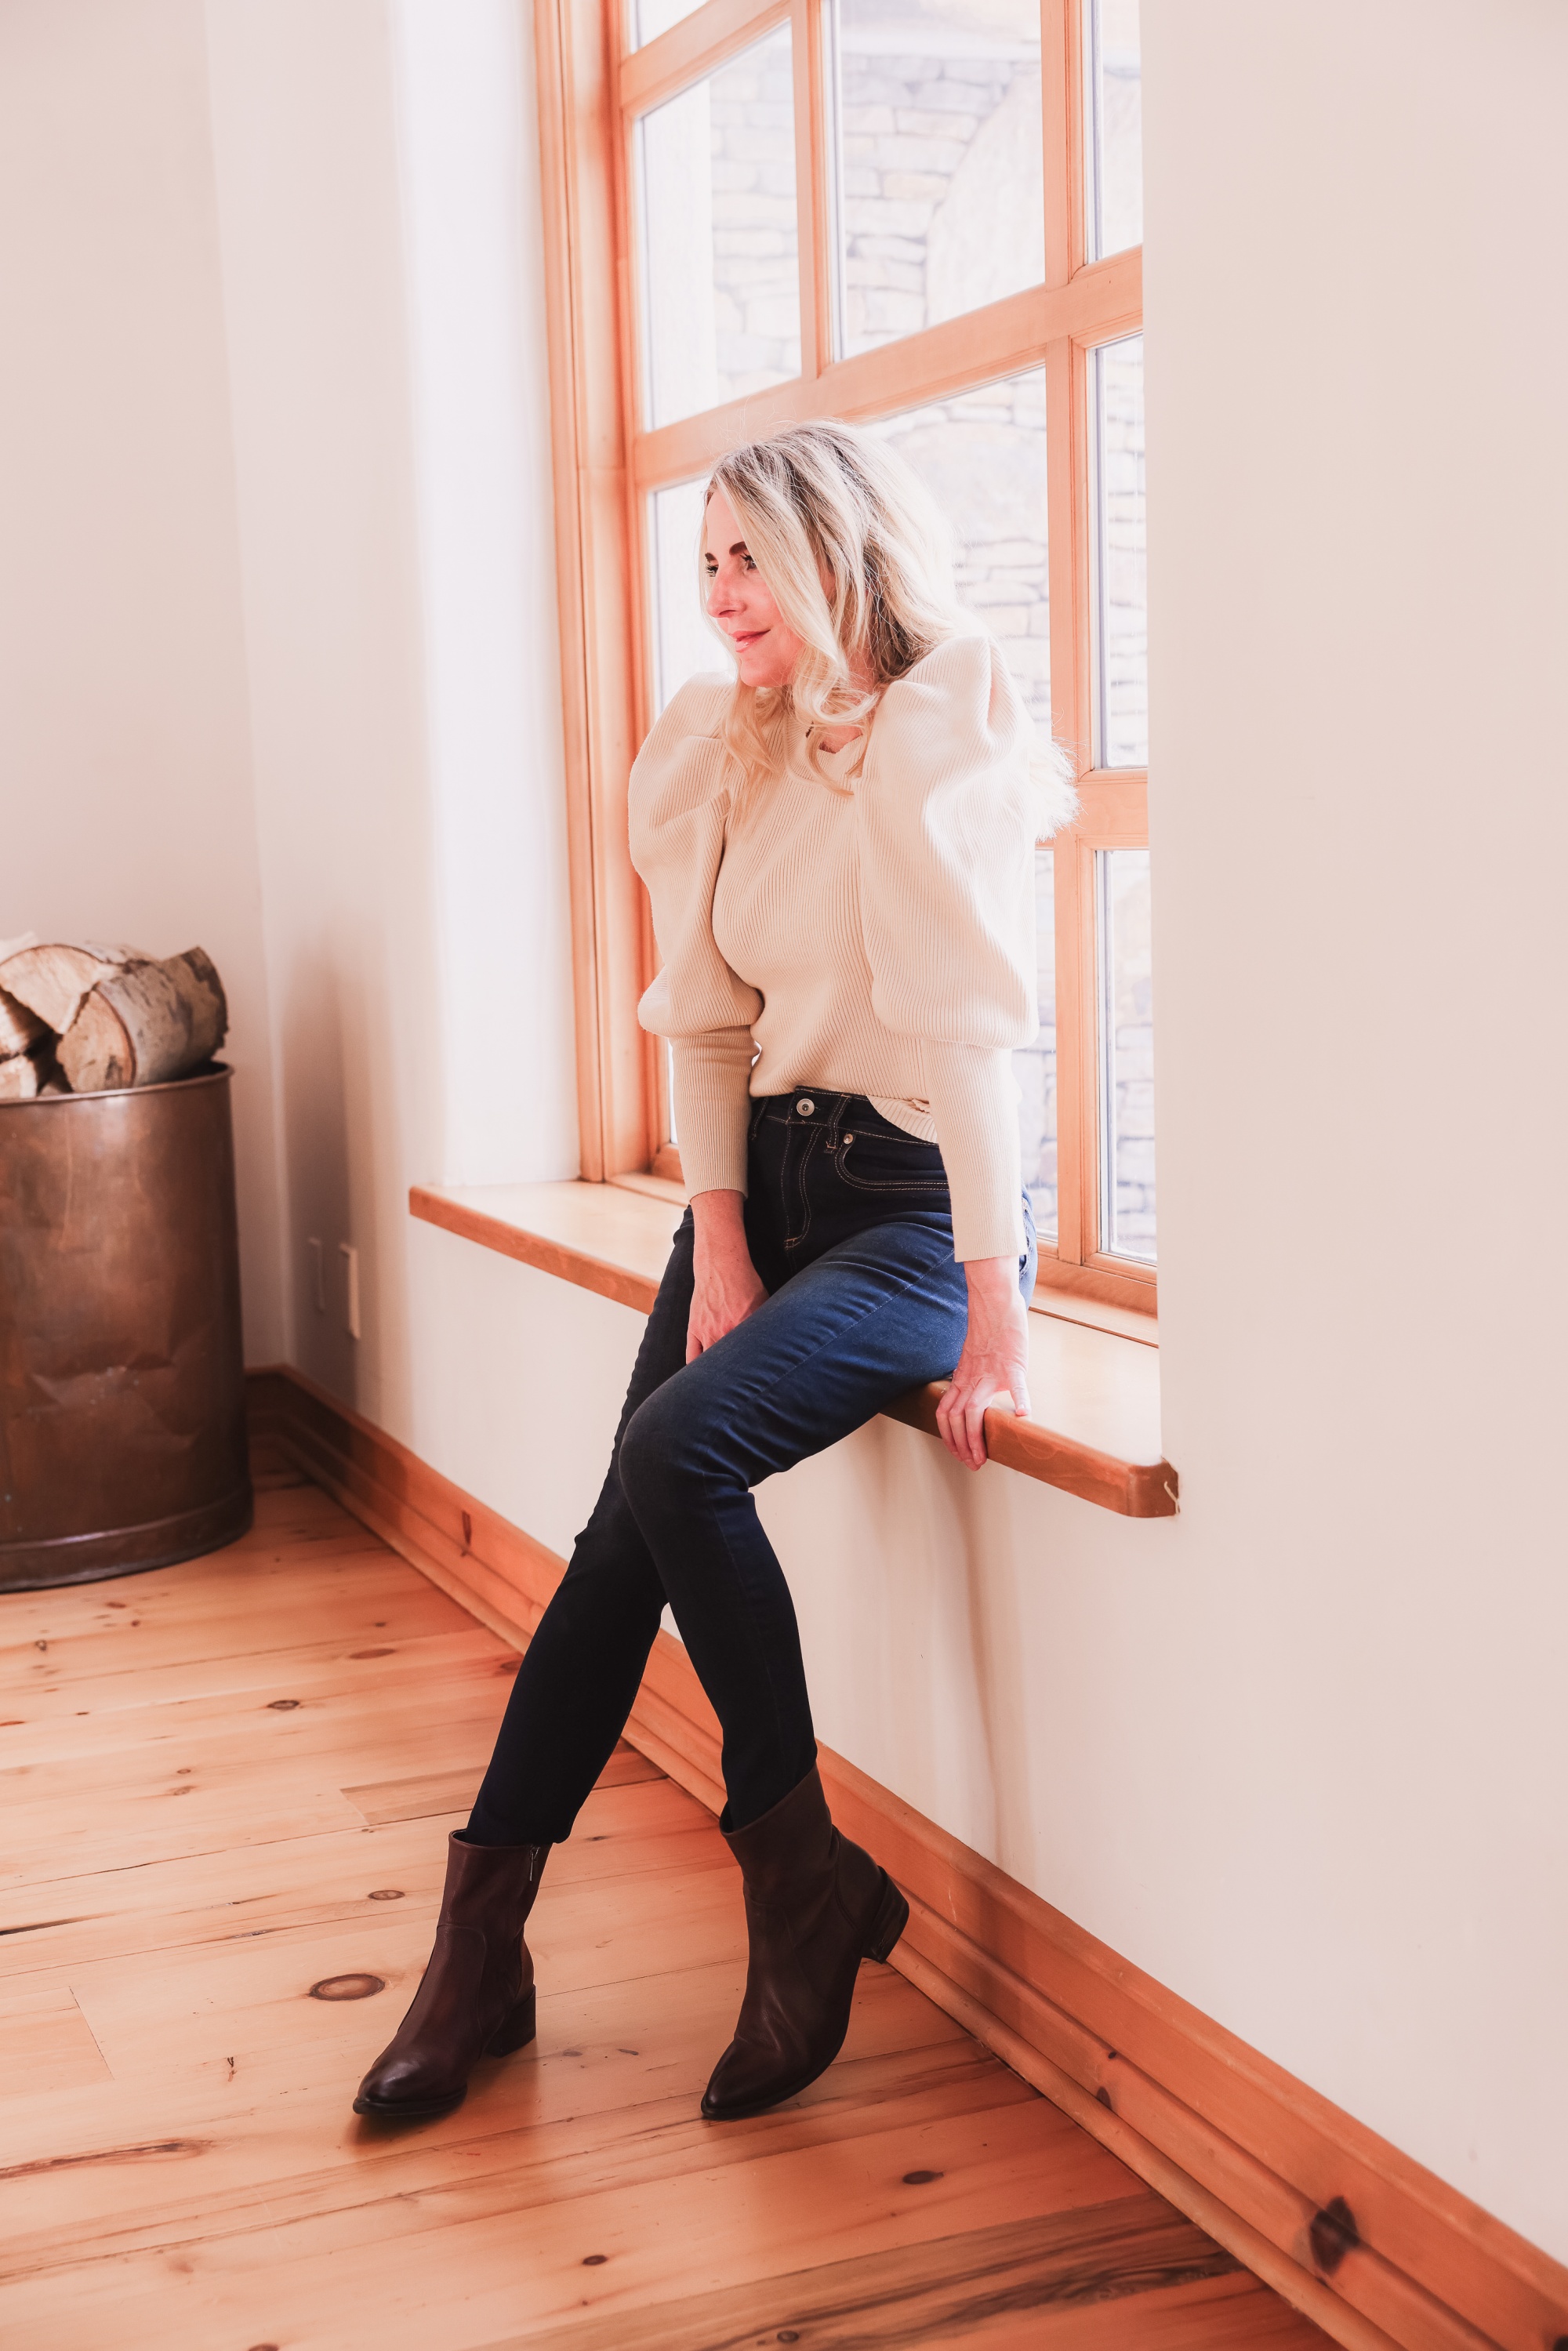 Best brown booties, Erin Busbee of Busbee wearing an ASTR the Label sculptural sleeve sweater with rag & bone skinny jeans and brown sam edelman hilary booties from Nordstrom in Telluride, Colorado